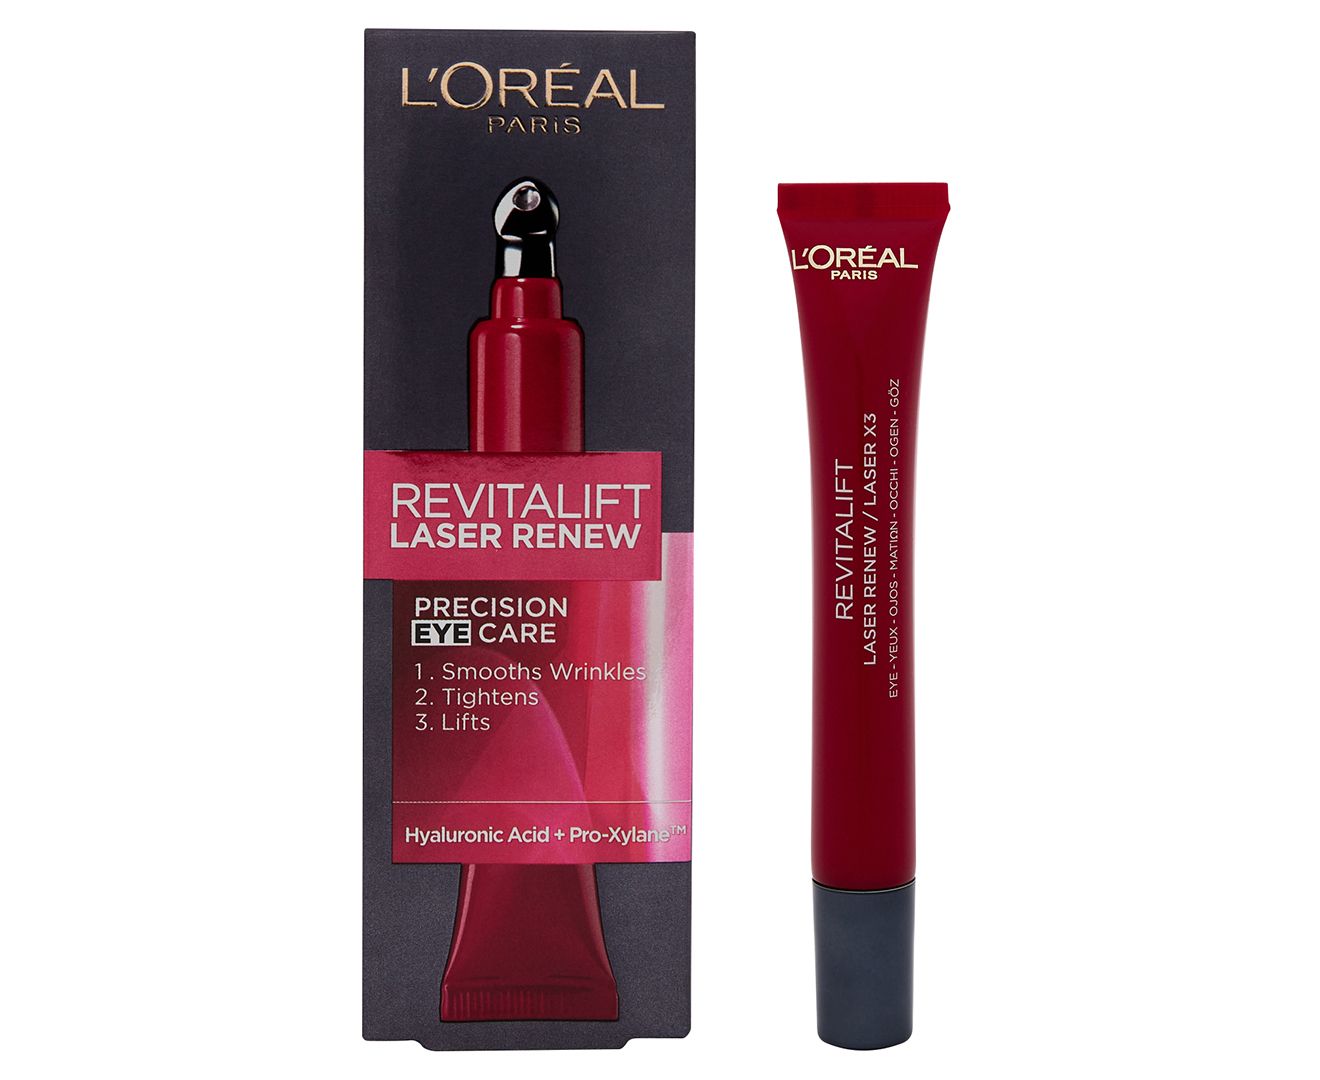 This isn't a laser treatment but it will give you intense action and target wrinkles, skin firmness and skin texture leaving your skin feeling smoother, plumper and looking more even. L'Oreal Revitalift Laser Renew Precision Eye Cream is an advanced anti-ageing cream with visible results in 4 weeks. Age 40+. This is a pack of 2.